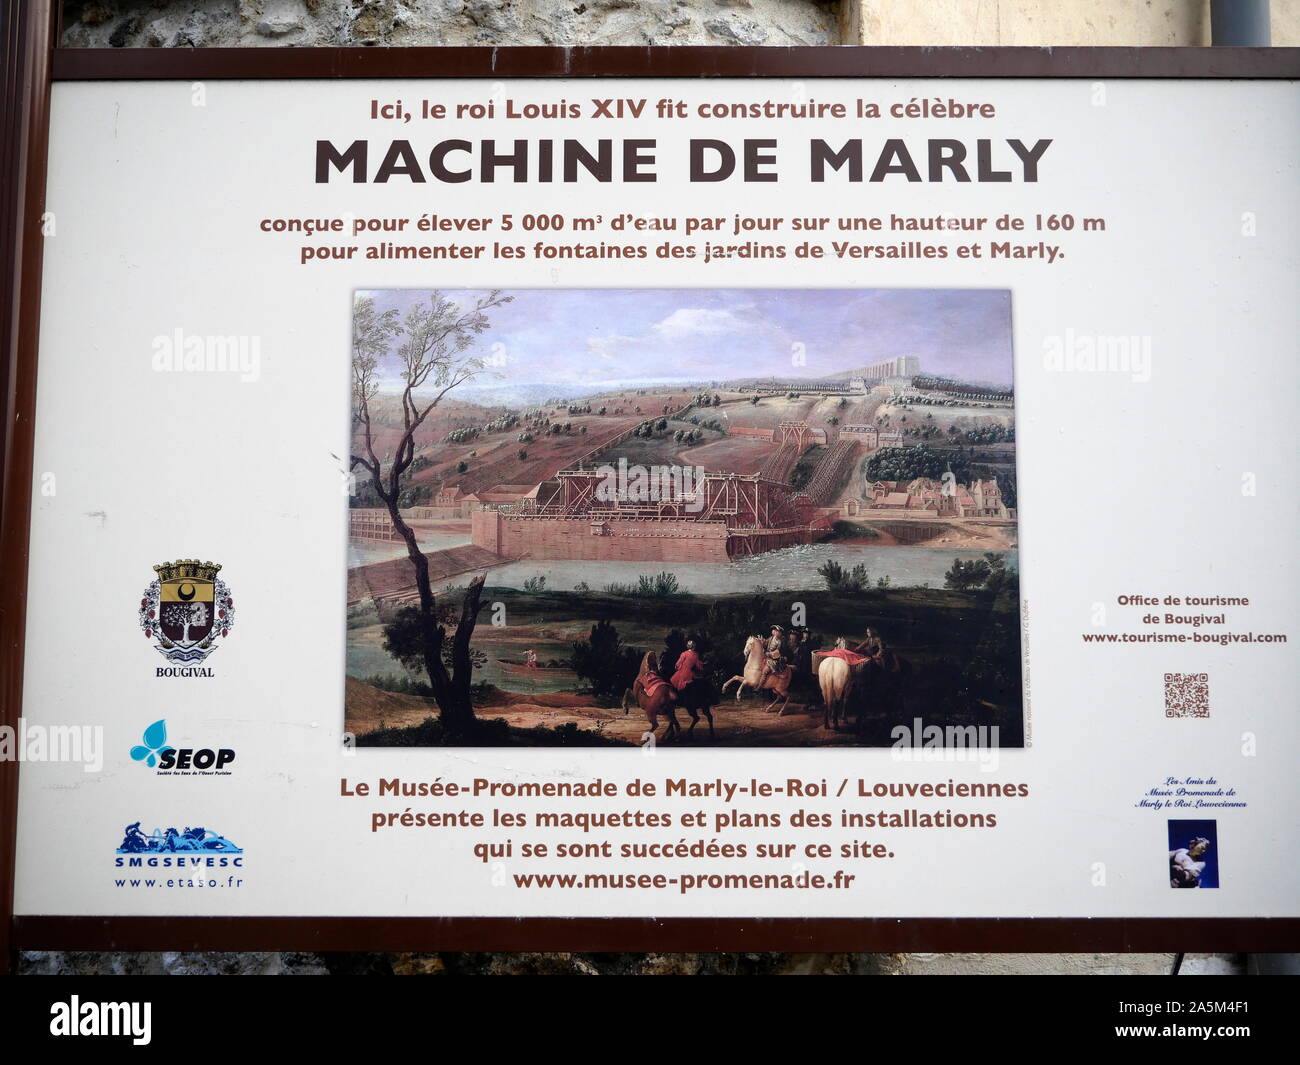 AJAXNETPHOTO. 2019. BOUGIVAL, FRANCE. - MACHINE DE MARLY - PUBLIC NOTICE-BOARD ANNOUNCING RESTORATION OF HISTORIC BUILDINGS OVERLOOKING THE RIVER SEINE, PART OF THE ORIGINAL MACHINE DE MARLY WATERWORKS COMPLEX BUILT IN 17TH CNTURY TO PUMP WATER UPHILL FEEDING THE GARDENS OF VERSAILLES AND MARLY, ADJACENT THE D113 BORDERING THE RIVER SEINE; LOCATIONS ONCE FREQUENTED BY 19TH CENTURY IMPRESSIONIST ARTISTS ALFRED SISLEY, CAMILLE PISSARRO, AUGUSTE RENOIR, CLAUDE MONET, FAUVIST MAURICE DE VLAMINCK AND MANY OTHERS.PHOTO:JONATHAN EASTLAND/AJAX REF:GX8 192609 676 Stock Photo